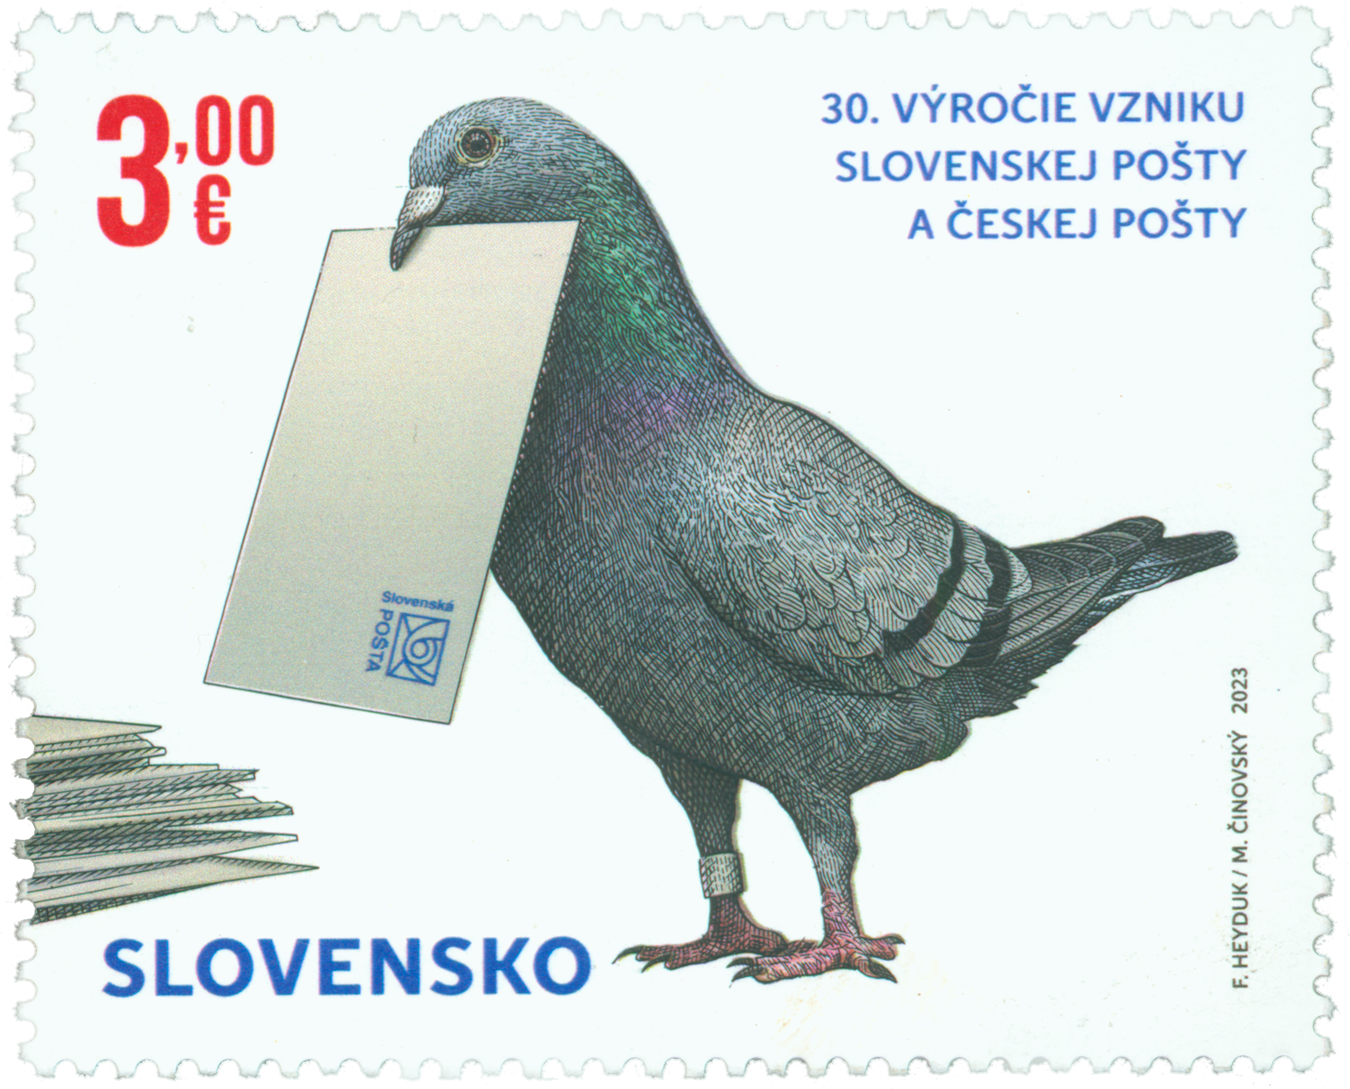 803 - A Joint Issue with the Czech Republic: the 30<sup>th</sup> Anniversary of the Establishment of the Czech Post and the Slovak Post